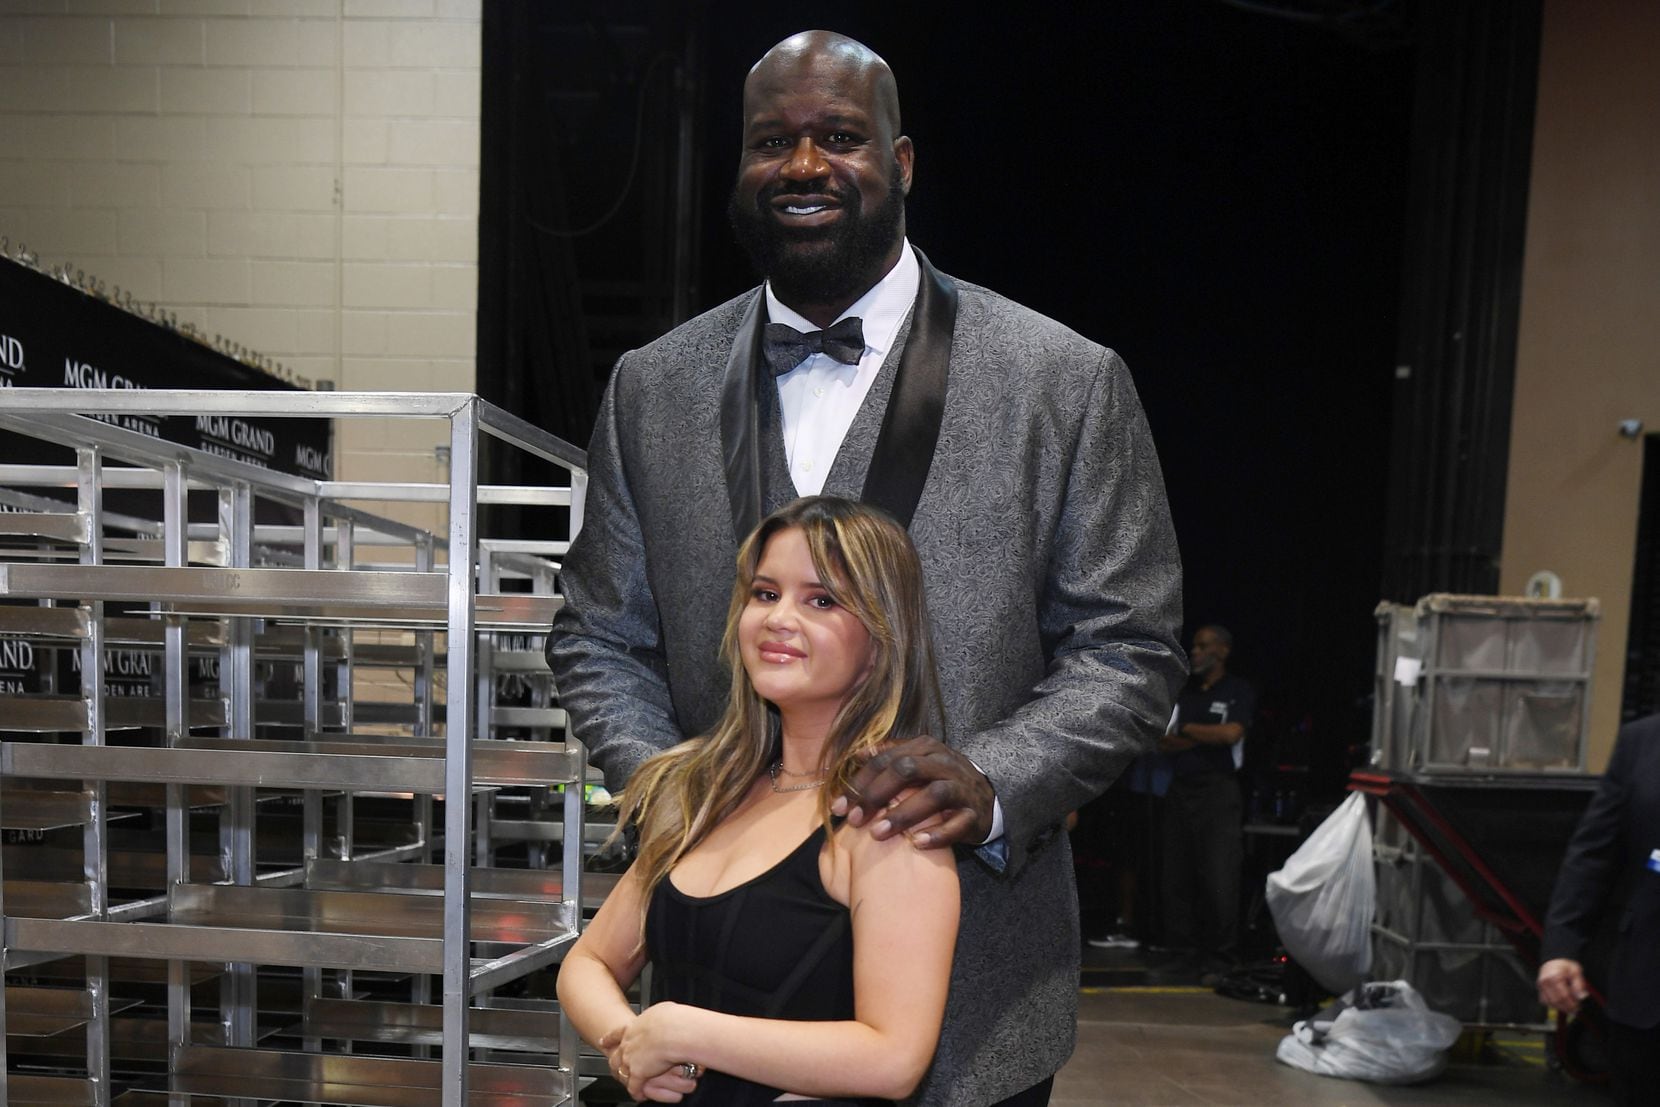 Maren poses with Shaquille O'Neal in dramatic height comparison